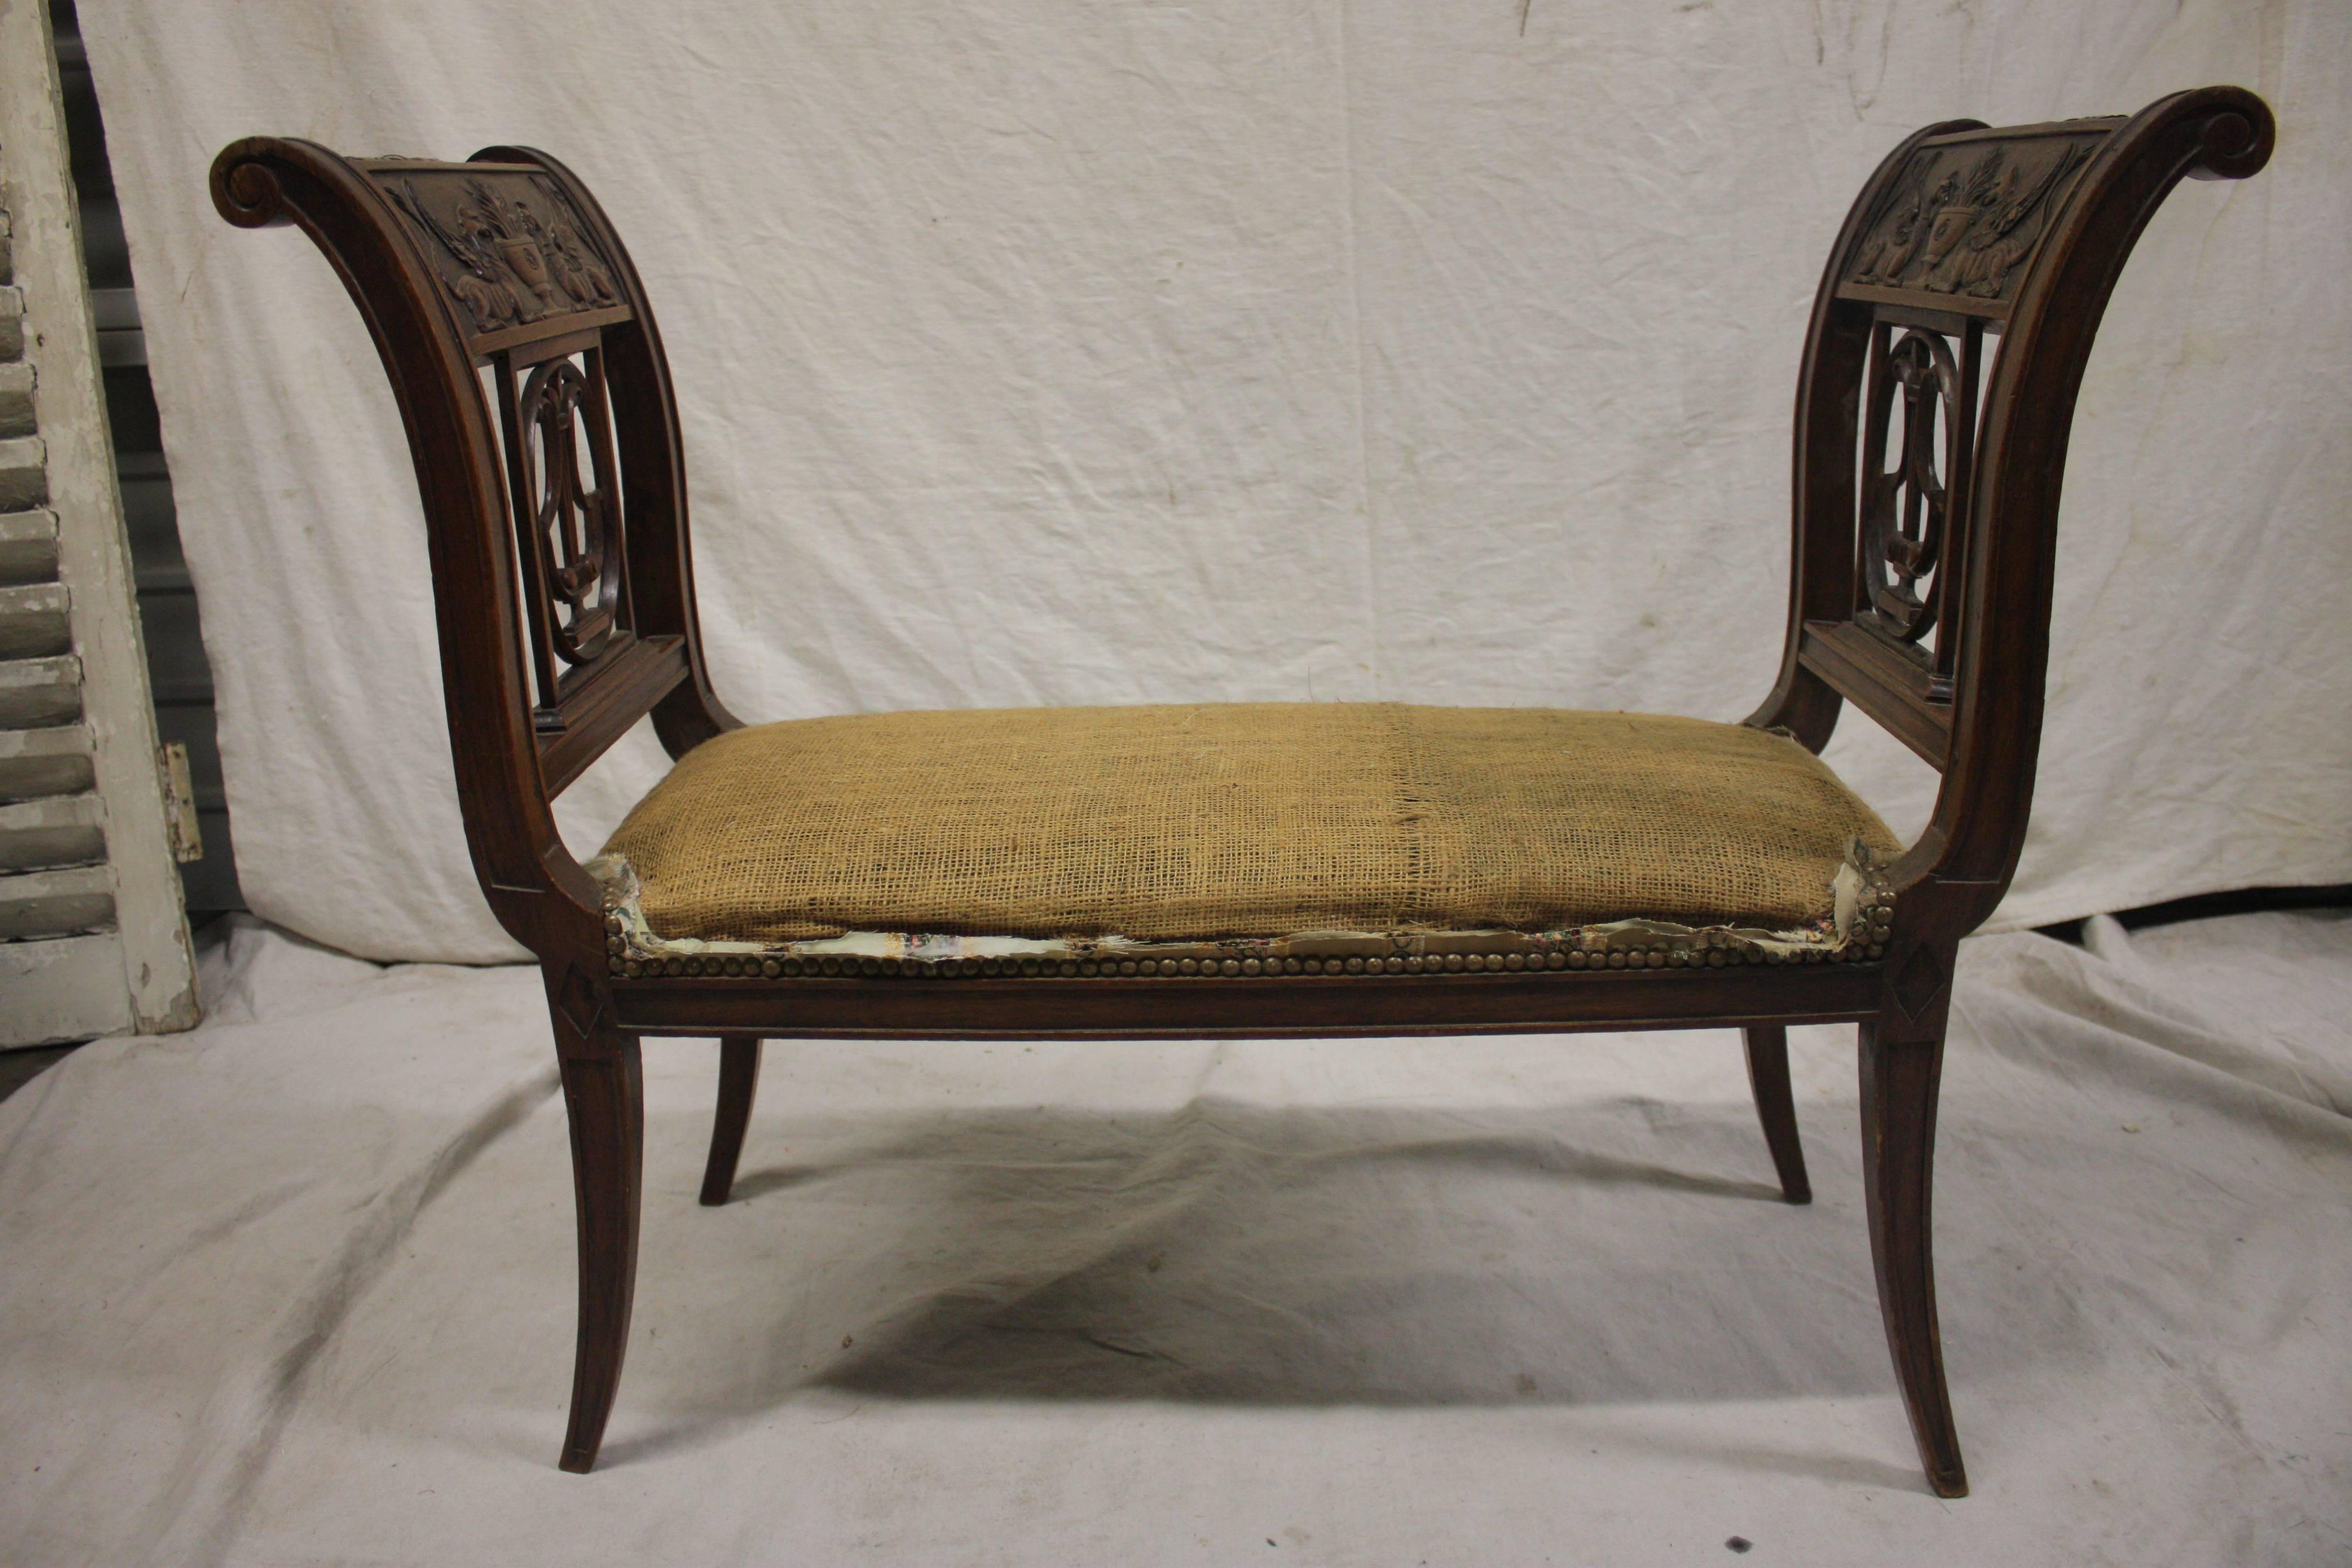 Charming French Directoire style bench. The wood is carved walnut, mid-19th century.